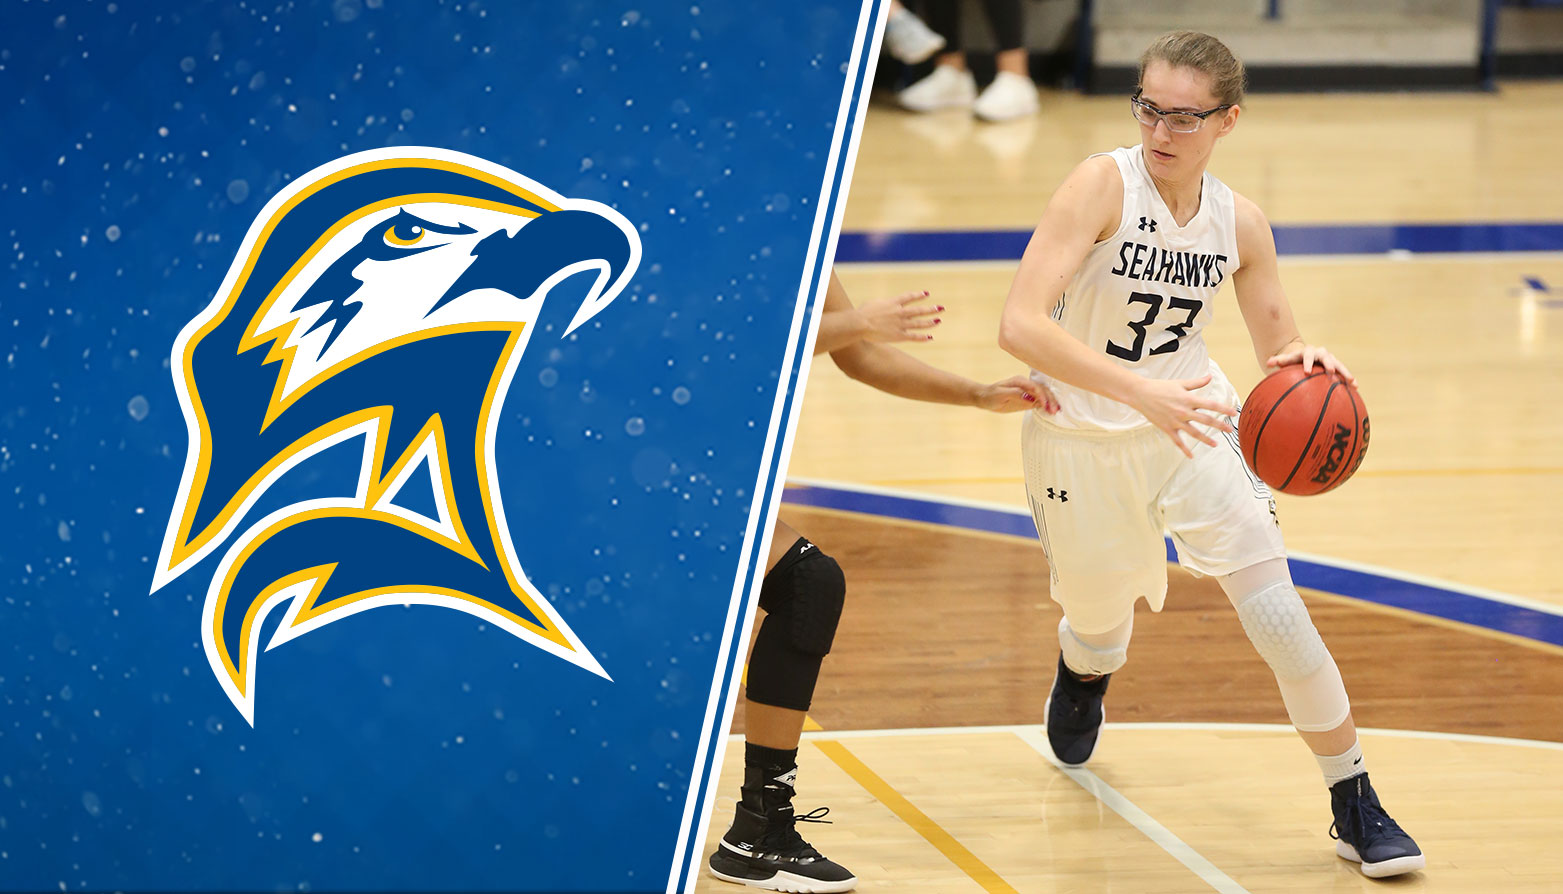 St. Mary's Gina Seifert Earns CAC Women's Basketball Player of the Week Accolades